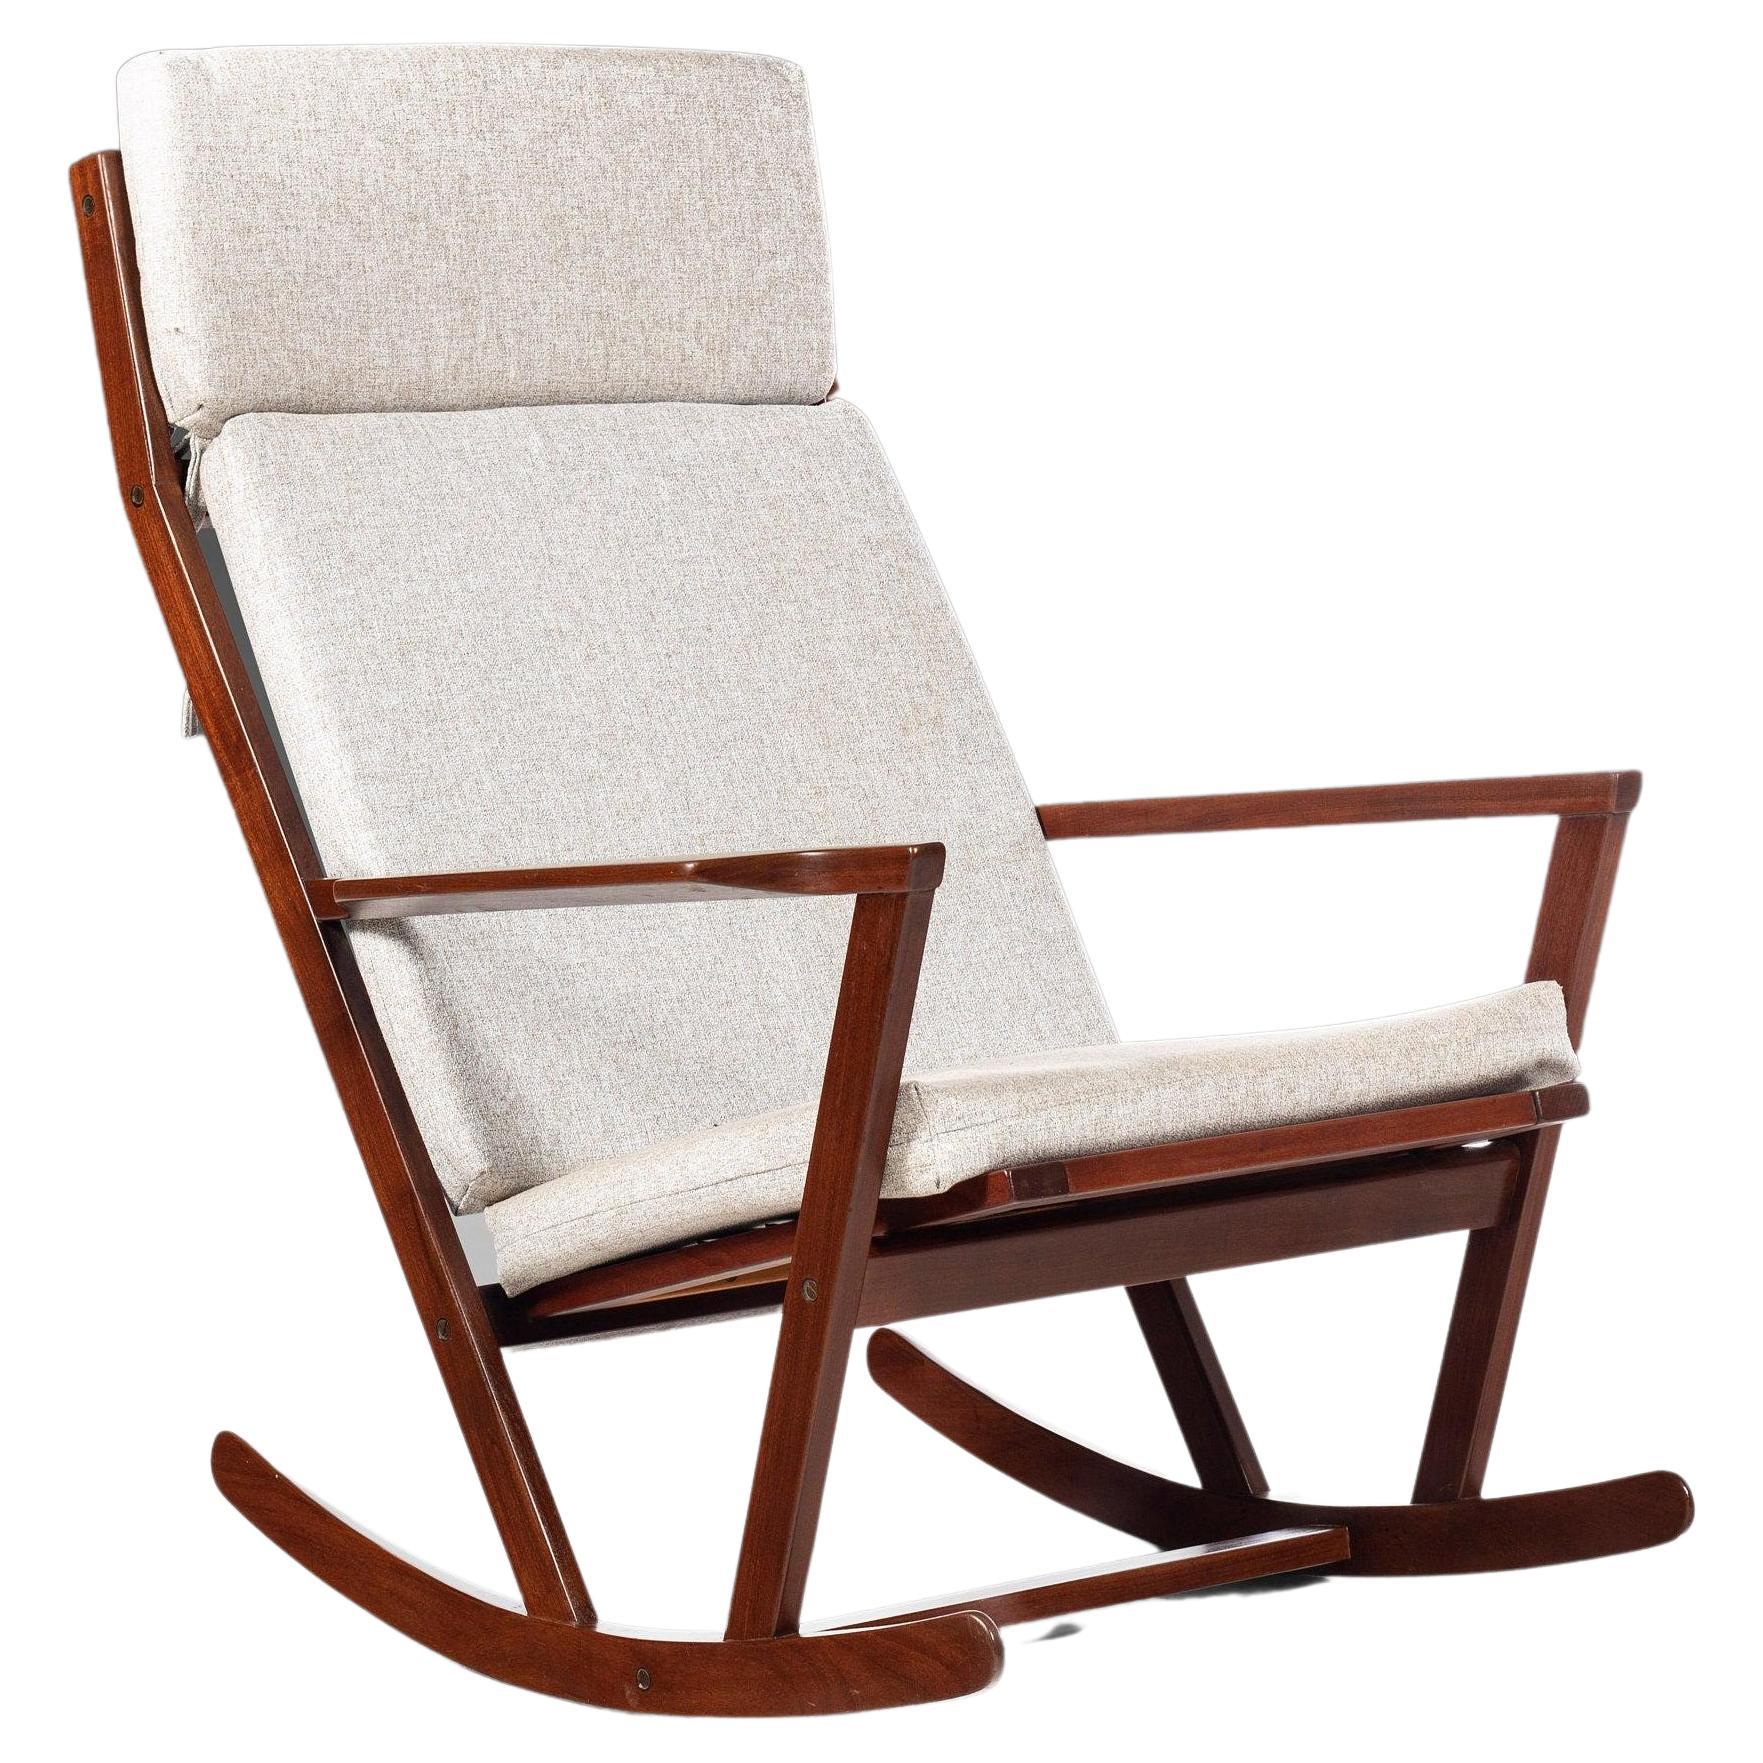 Rocking Chair by Poul Volther for Frem Rojle in Afromosia, New Fabric, c. 1960s